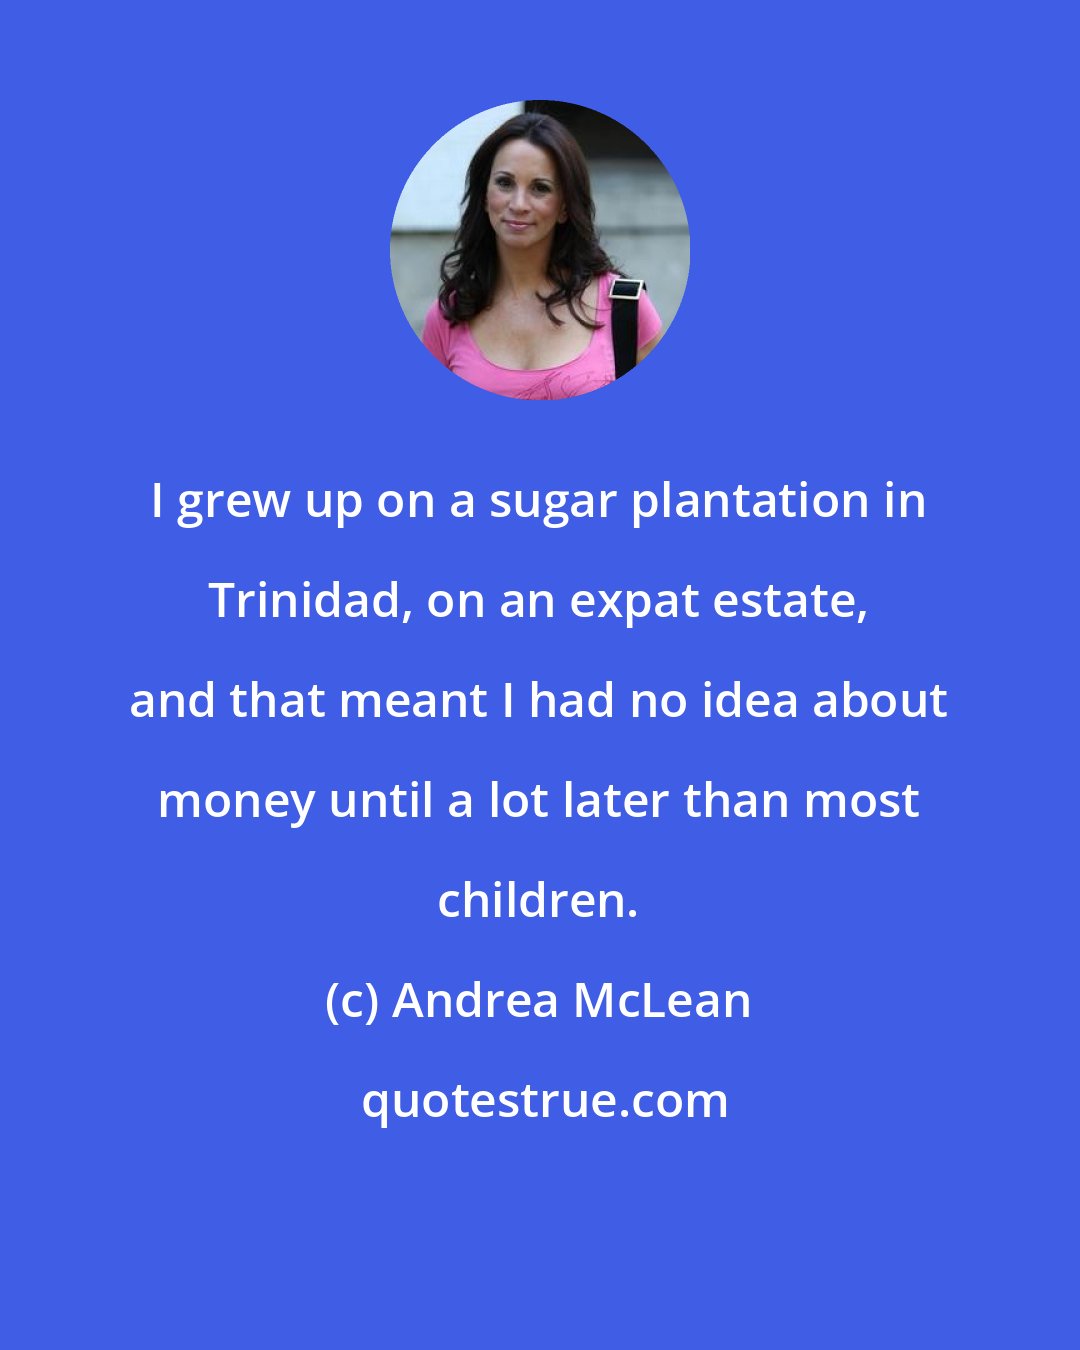 Andrea McLean: I grew up on a sugar plantation in Trinidad, on an expat estate, and that meant I had no idea about money until a lot later than most children.